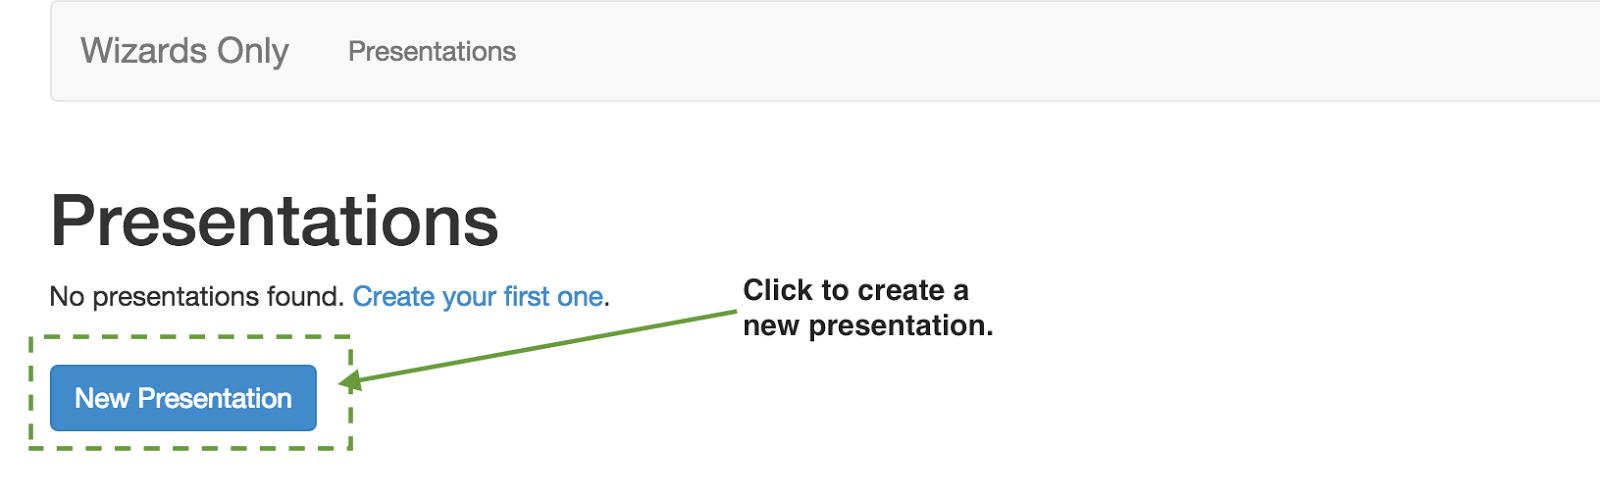 create-new-presentation.png